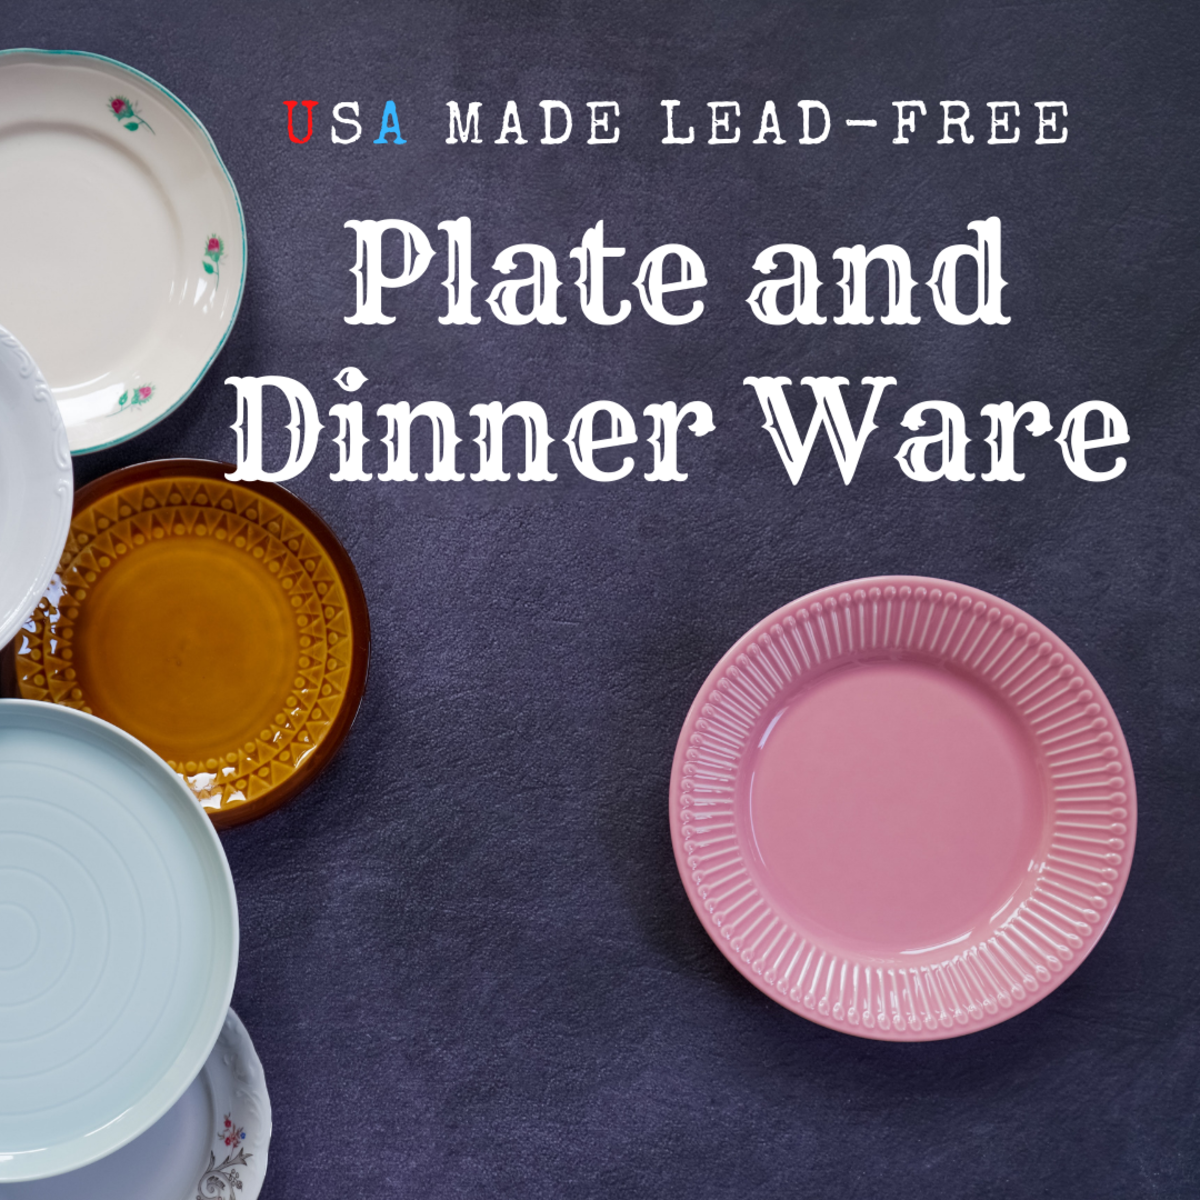 5 Great Lead-Free Dinnerware Brands Made in the USA